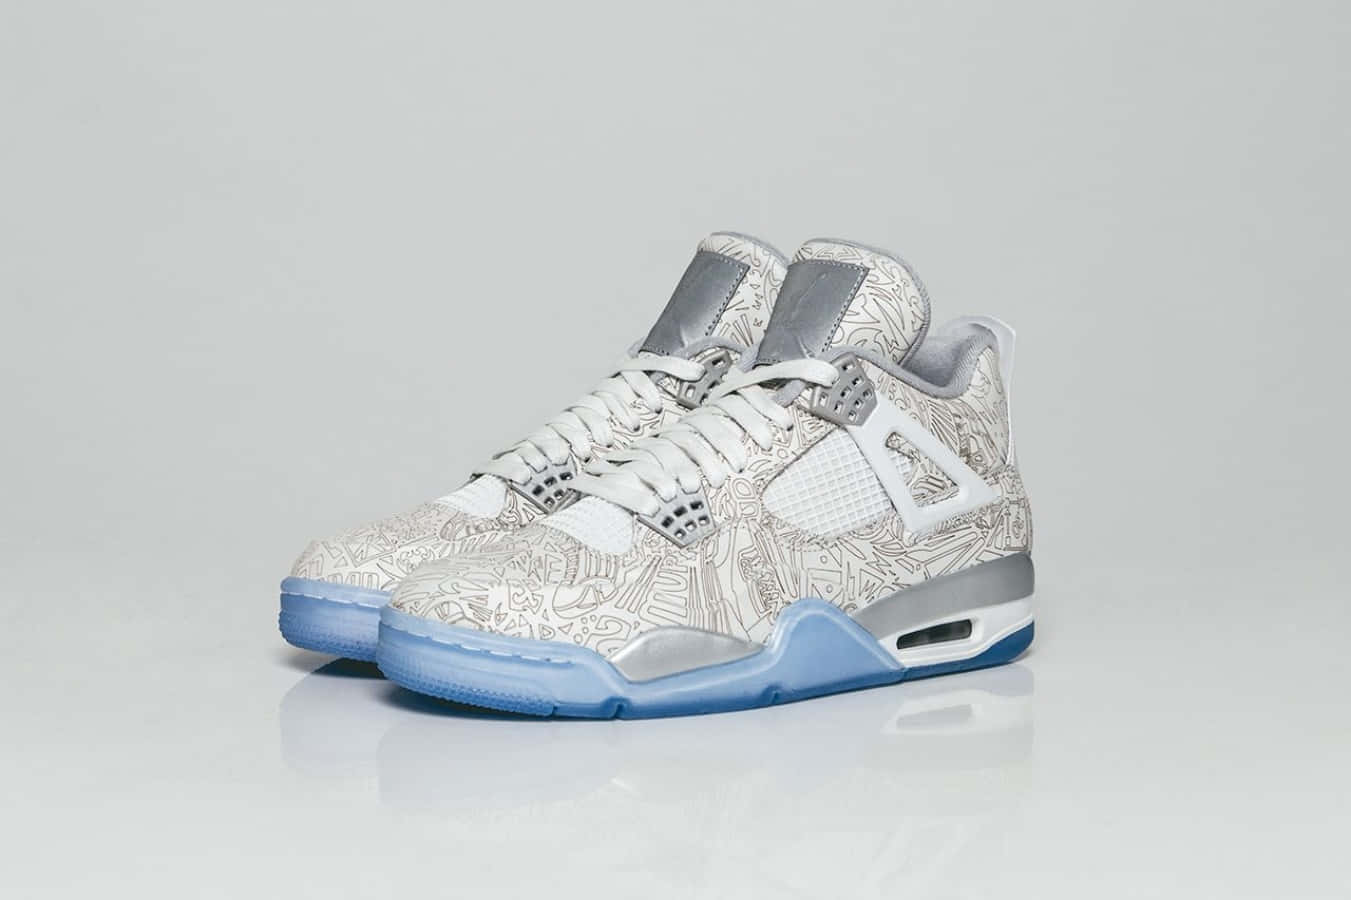 Street Style With The Air Jordan 4 Wallpaper